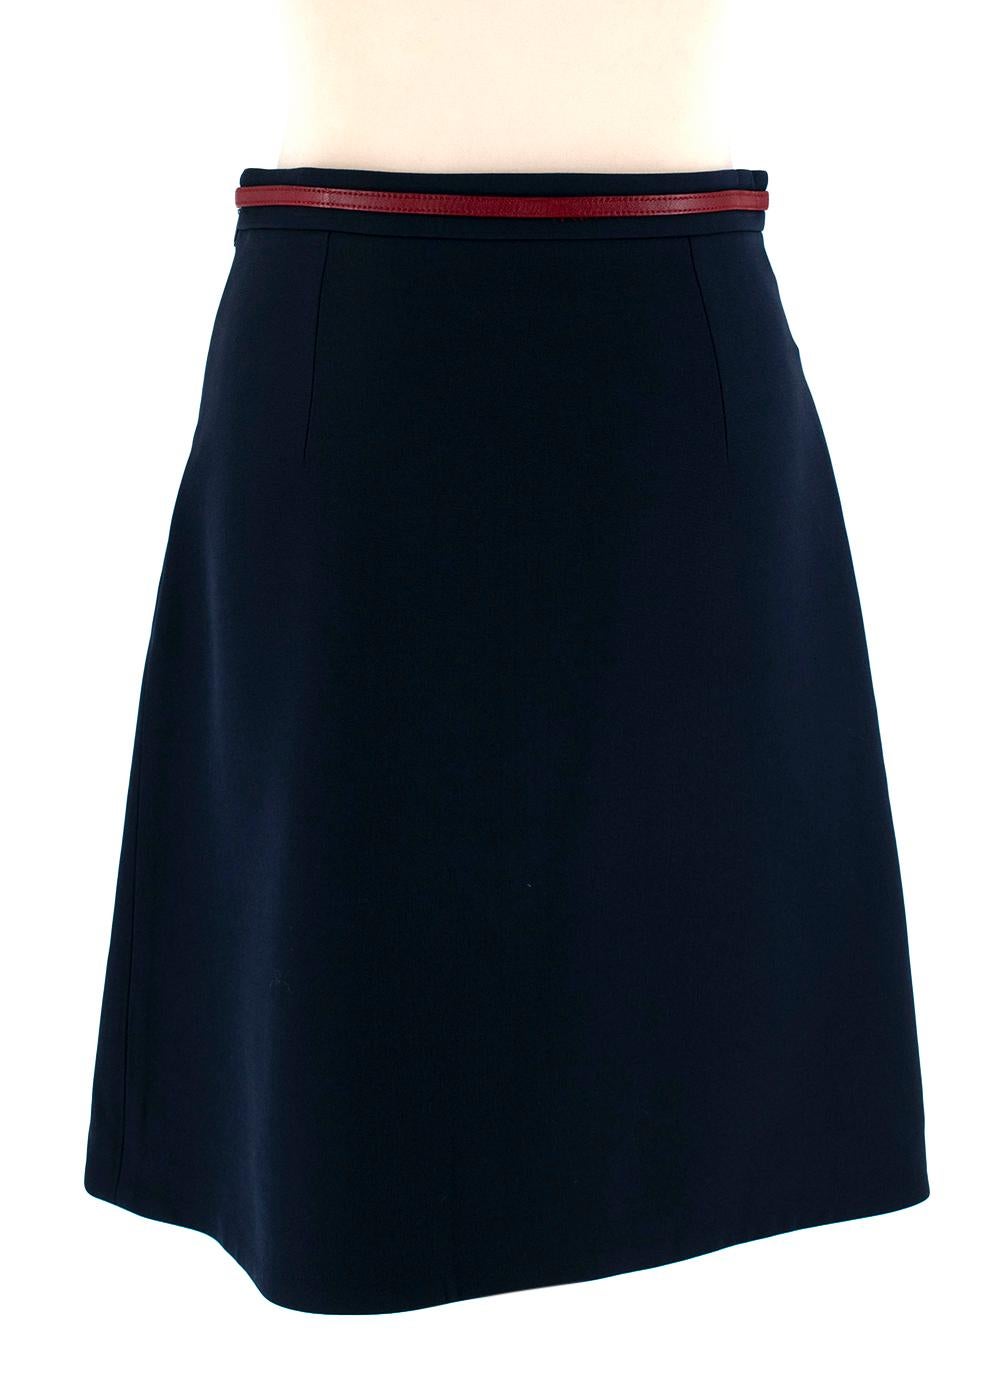 Gucci Navy Wool & Silk Blend Horsebit Skirt

- Classy below the knee length
- Red leather and gold hardware horse bit detailing around the waist
- Side zip fastening
- 'G' glass caramel & gold buttons with pleat in the middle
- Back darts to